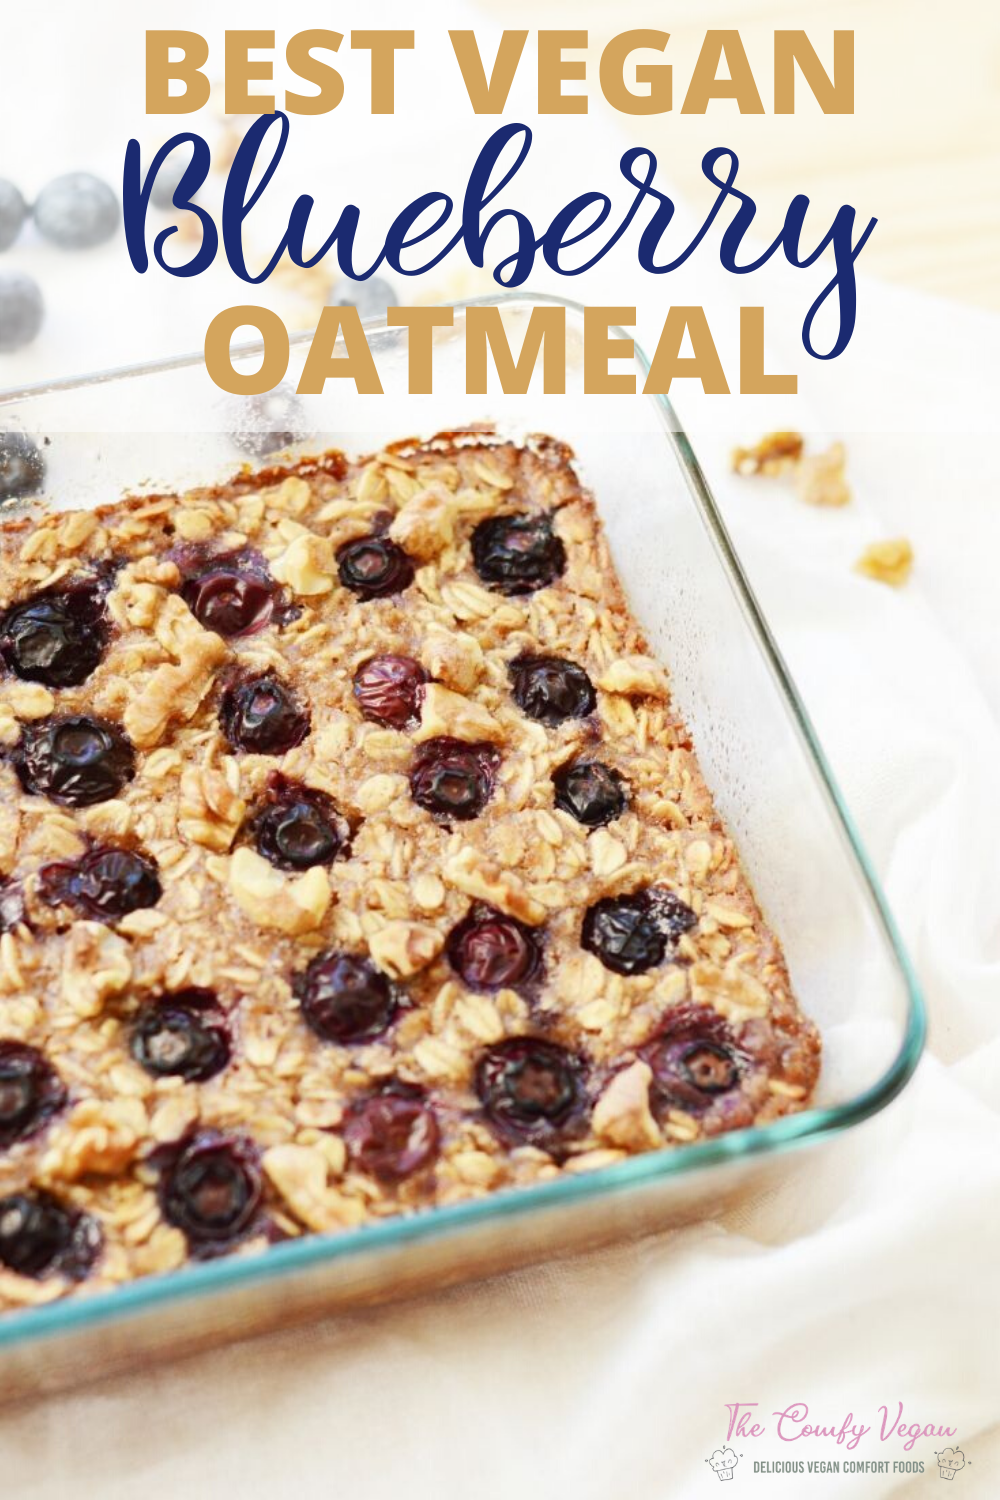 Enjoy this healthy vegan baked blueberry oatmeal. It is naturally sweetened with fruit and uses only healthy ingredients for a guilt free hearty breakfast.